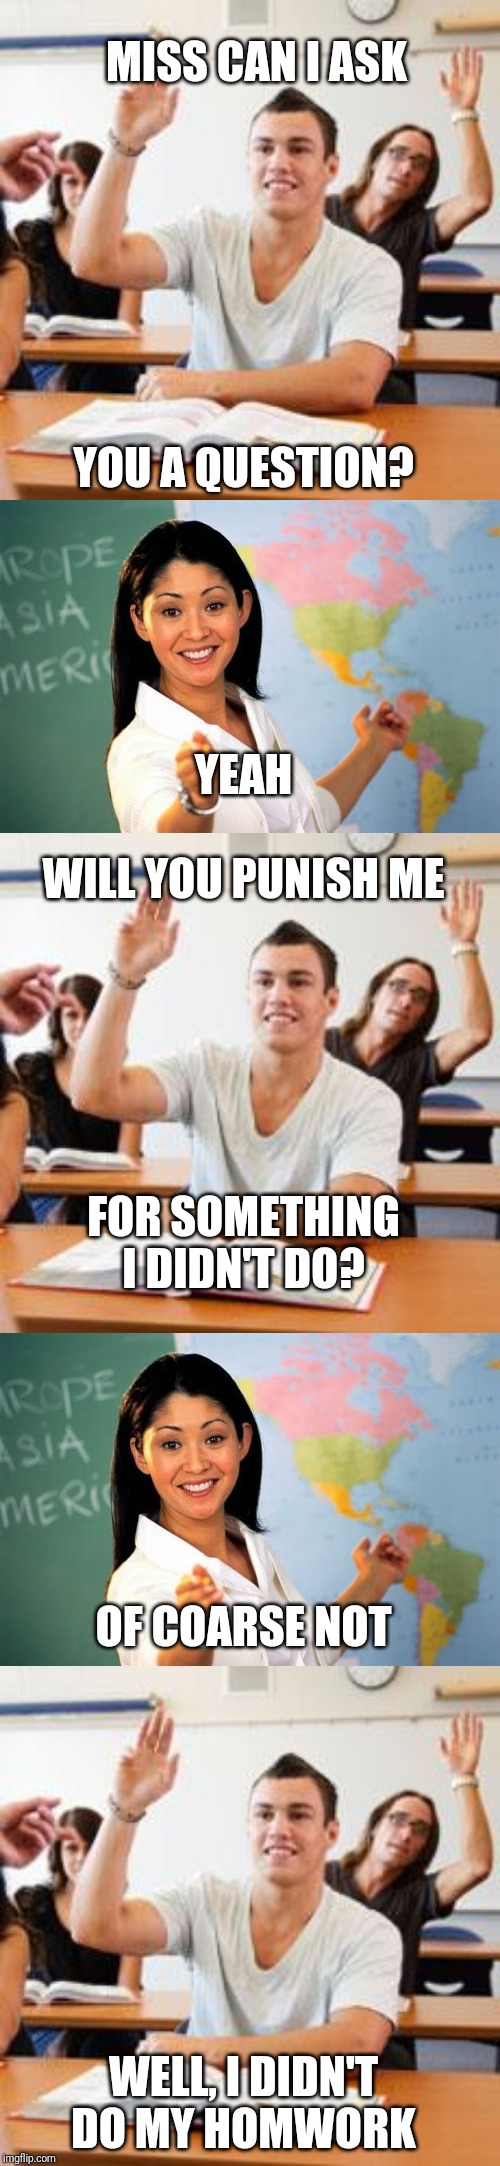 Smart student | MISS CAN I ASK; YOU A QUESTION? YEAH; WILL YOU PUNISH ME; FOR SOMETHING I DIDN'T DO? OF COARSE NOT; WELL, I DIDN'T DO MY HOMWORK | image tagged in memes,unhelpful high school teacher,retarded student in classroom,funny,smart | made w/ Imgflip meme maker